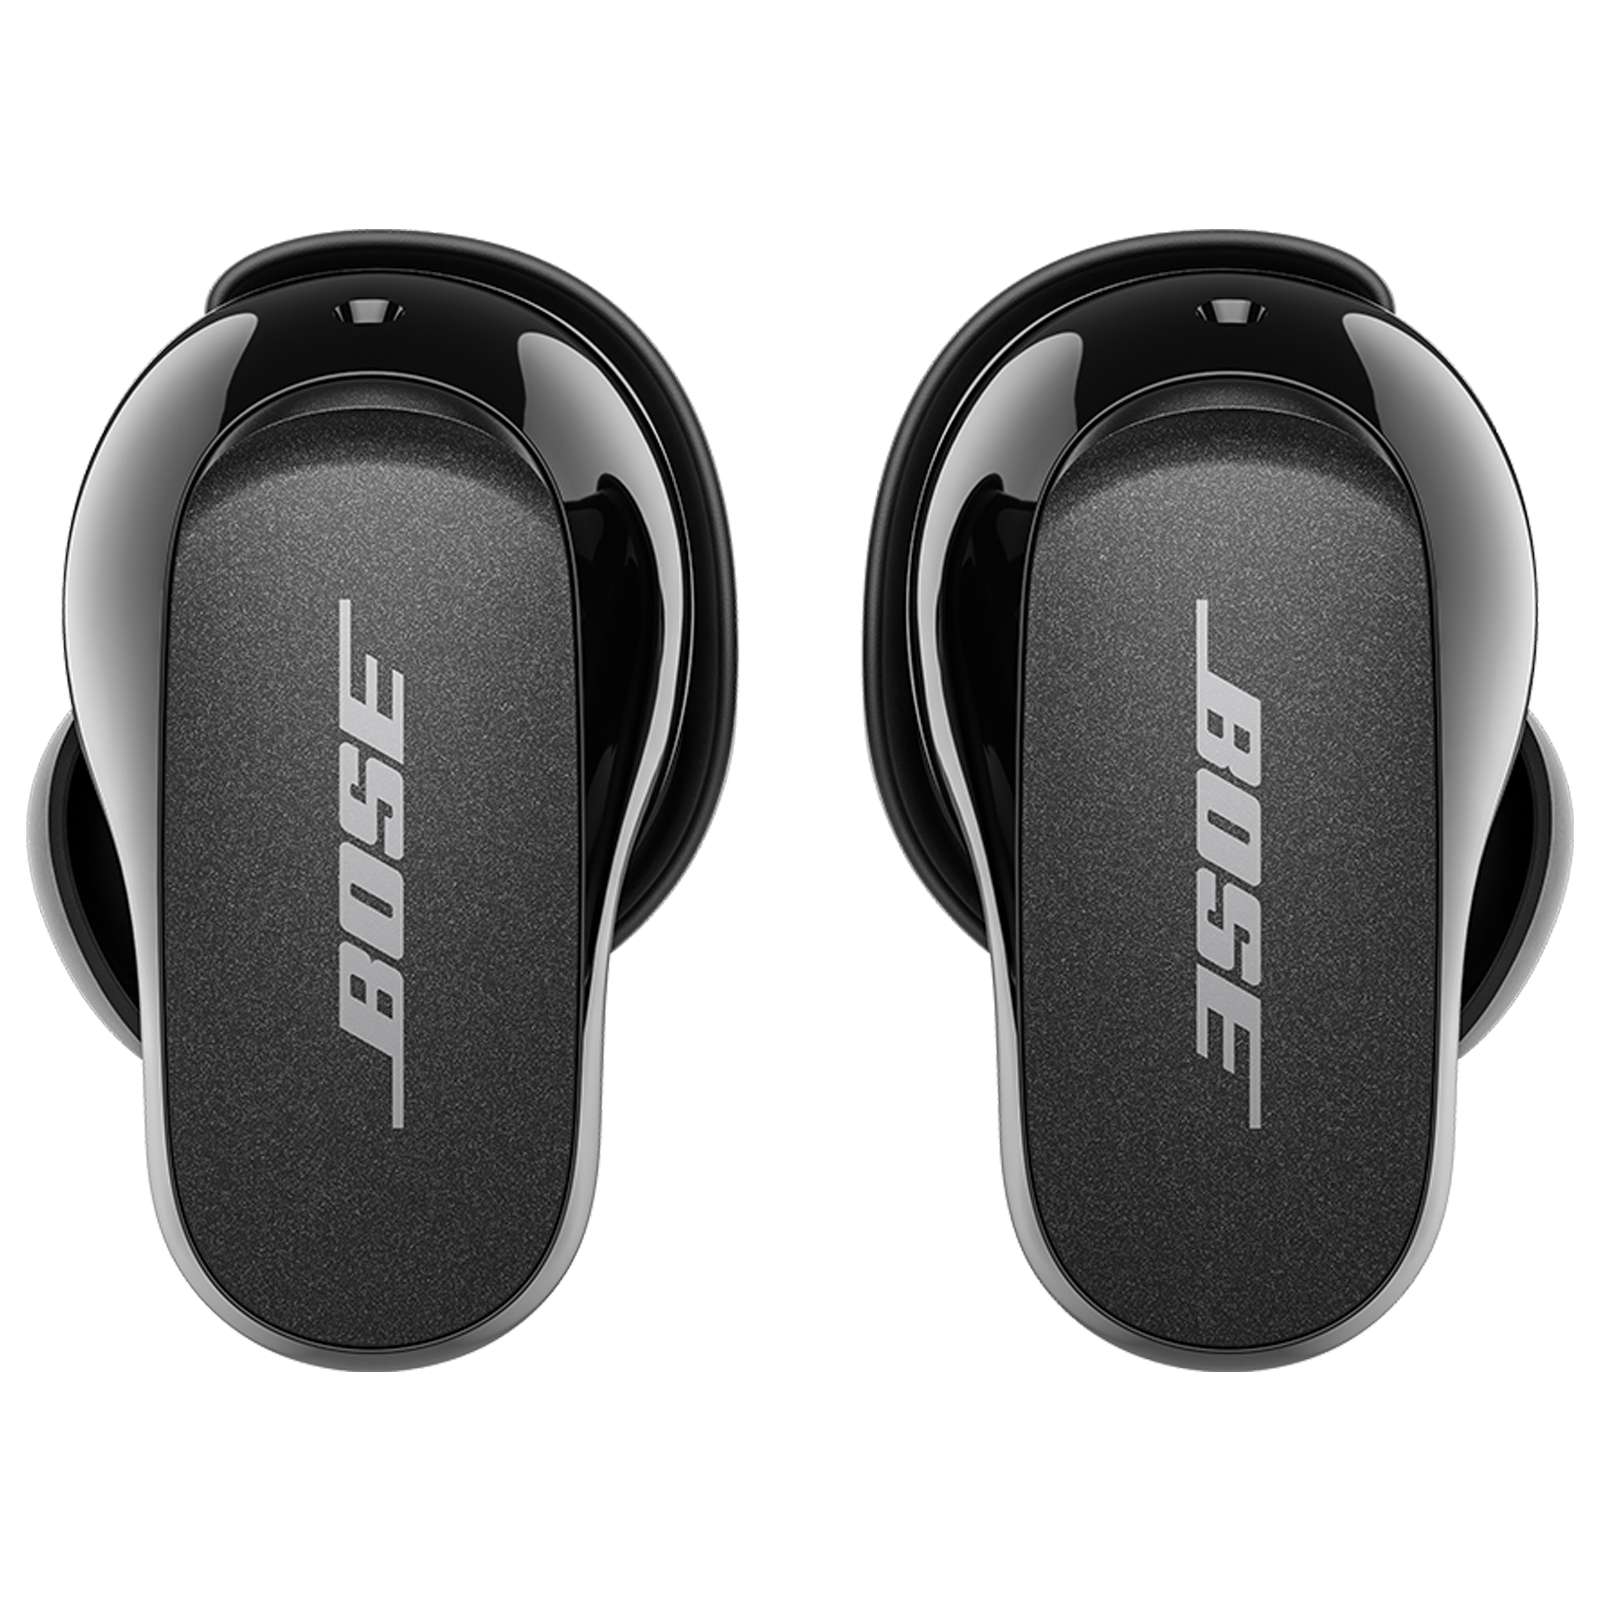 BOSE QuietComfort II TWS Earbuds with Active Noise Cancellation (IPX4 Water Resistant, Up to 6 Hours Playback, Triple Black)